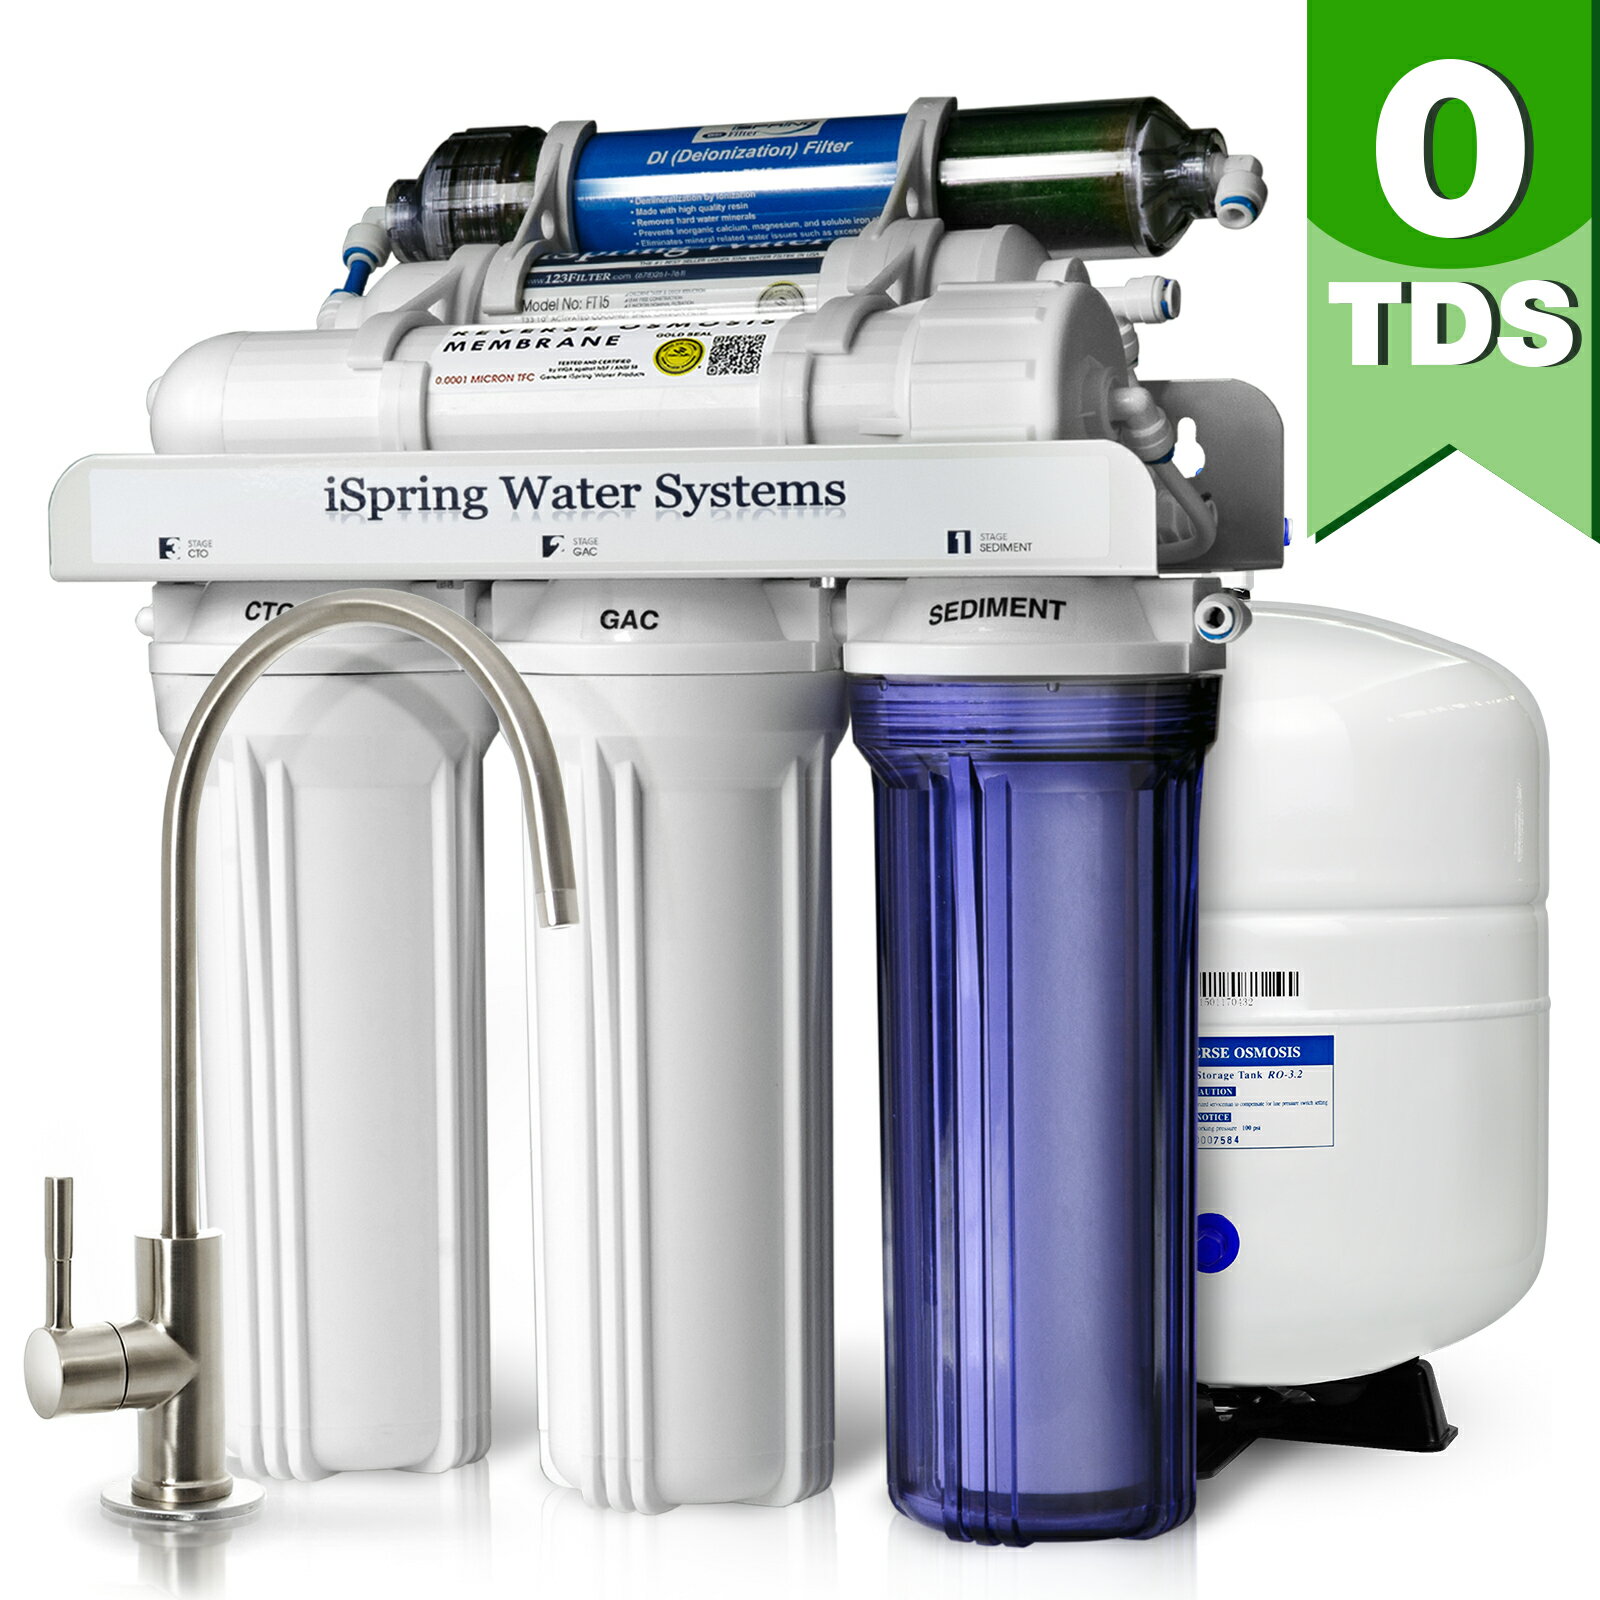 iSpring Water Systems iSpring 6stage 75GPD Reverse Osmosis RO Water Filter System with DI 